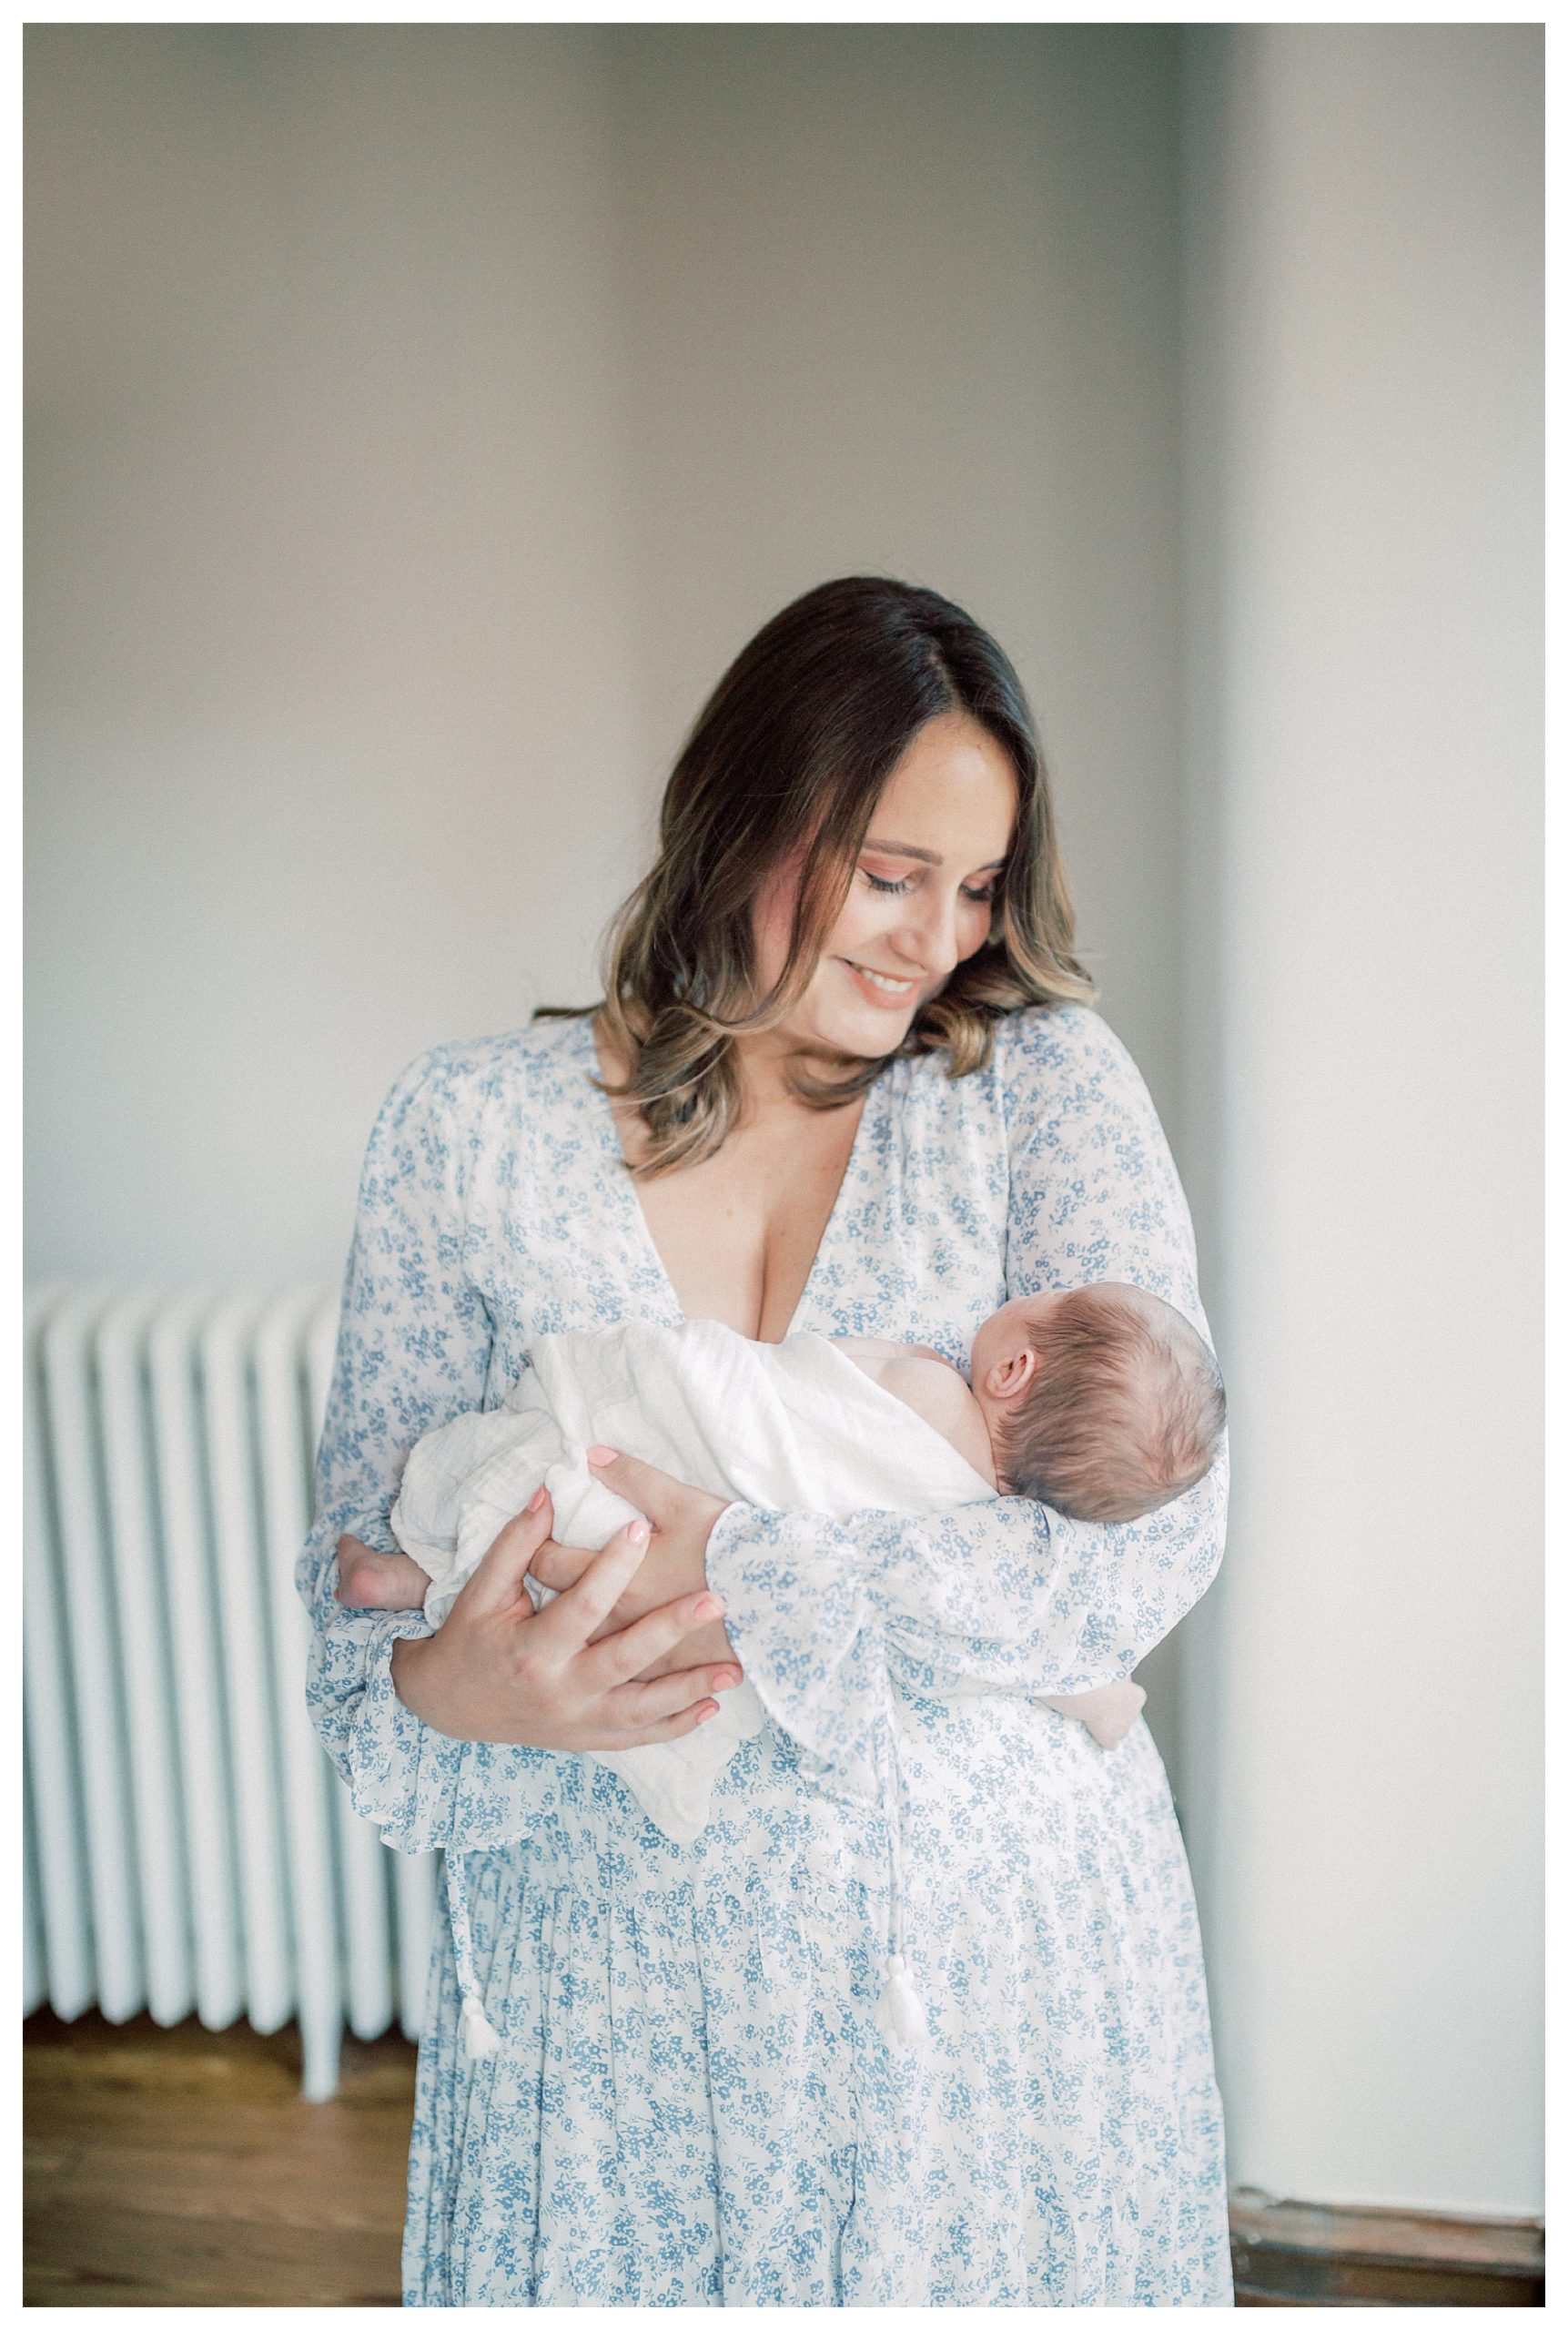 Brown-haired mother smiles down at newborn baby during in-home newborn session